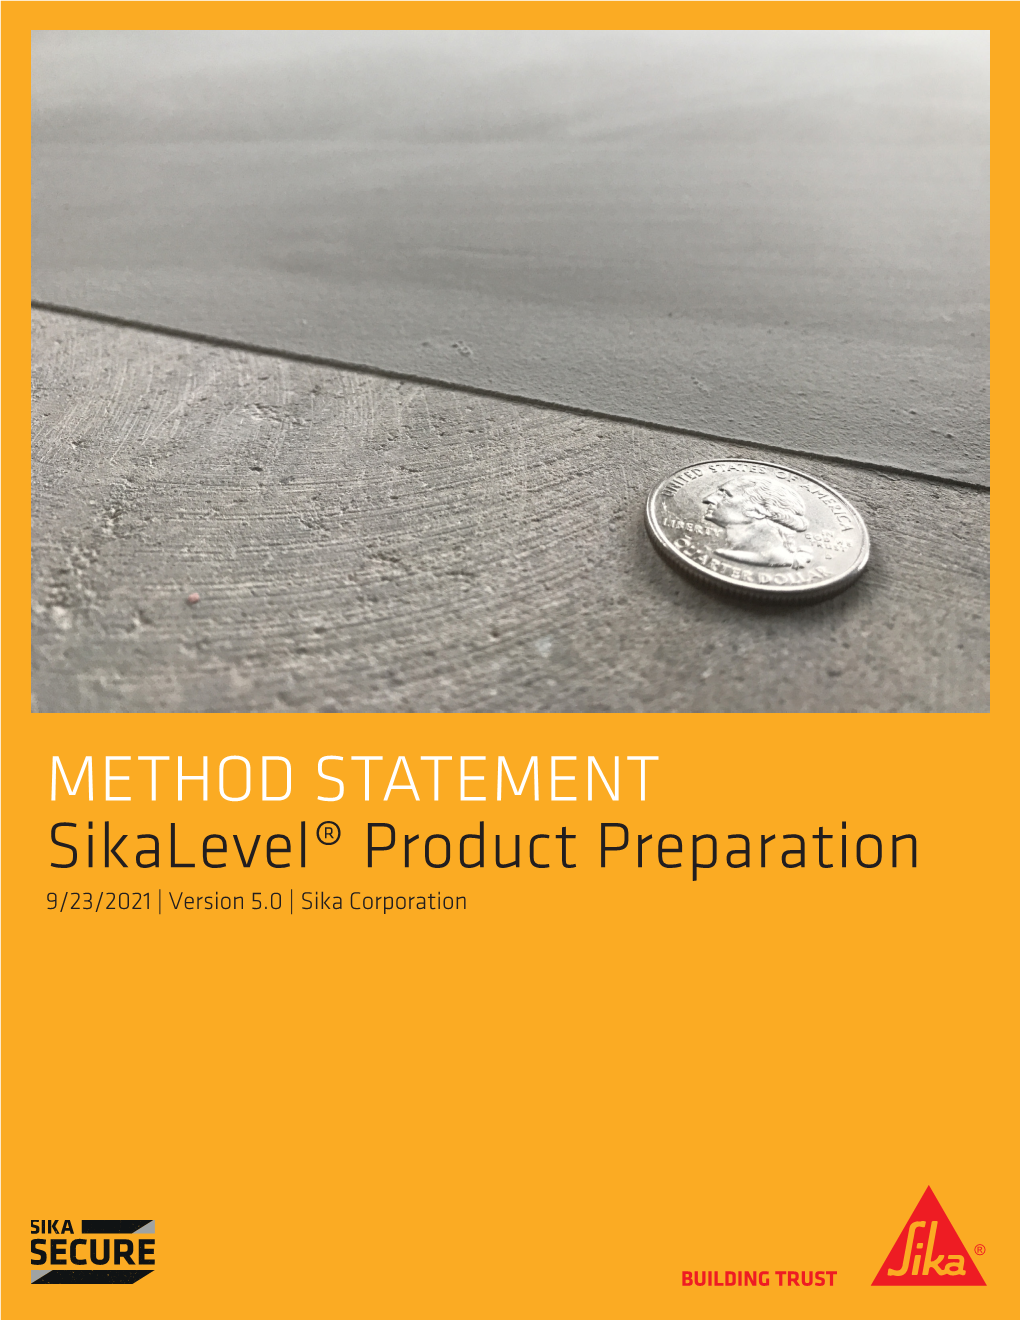 METHOD STATEMENT Sikalevel® Product Preparation 9/23/2021 | Version 5.0 | Sika Corporation Method Statement Sikalevel Products 9/23/2021, Version 5.0